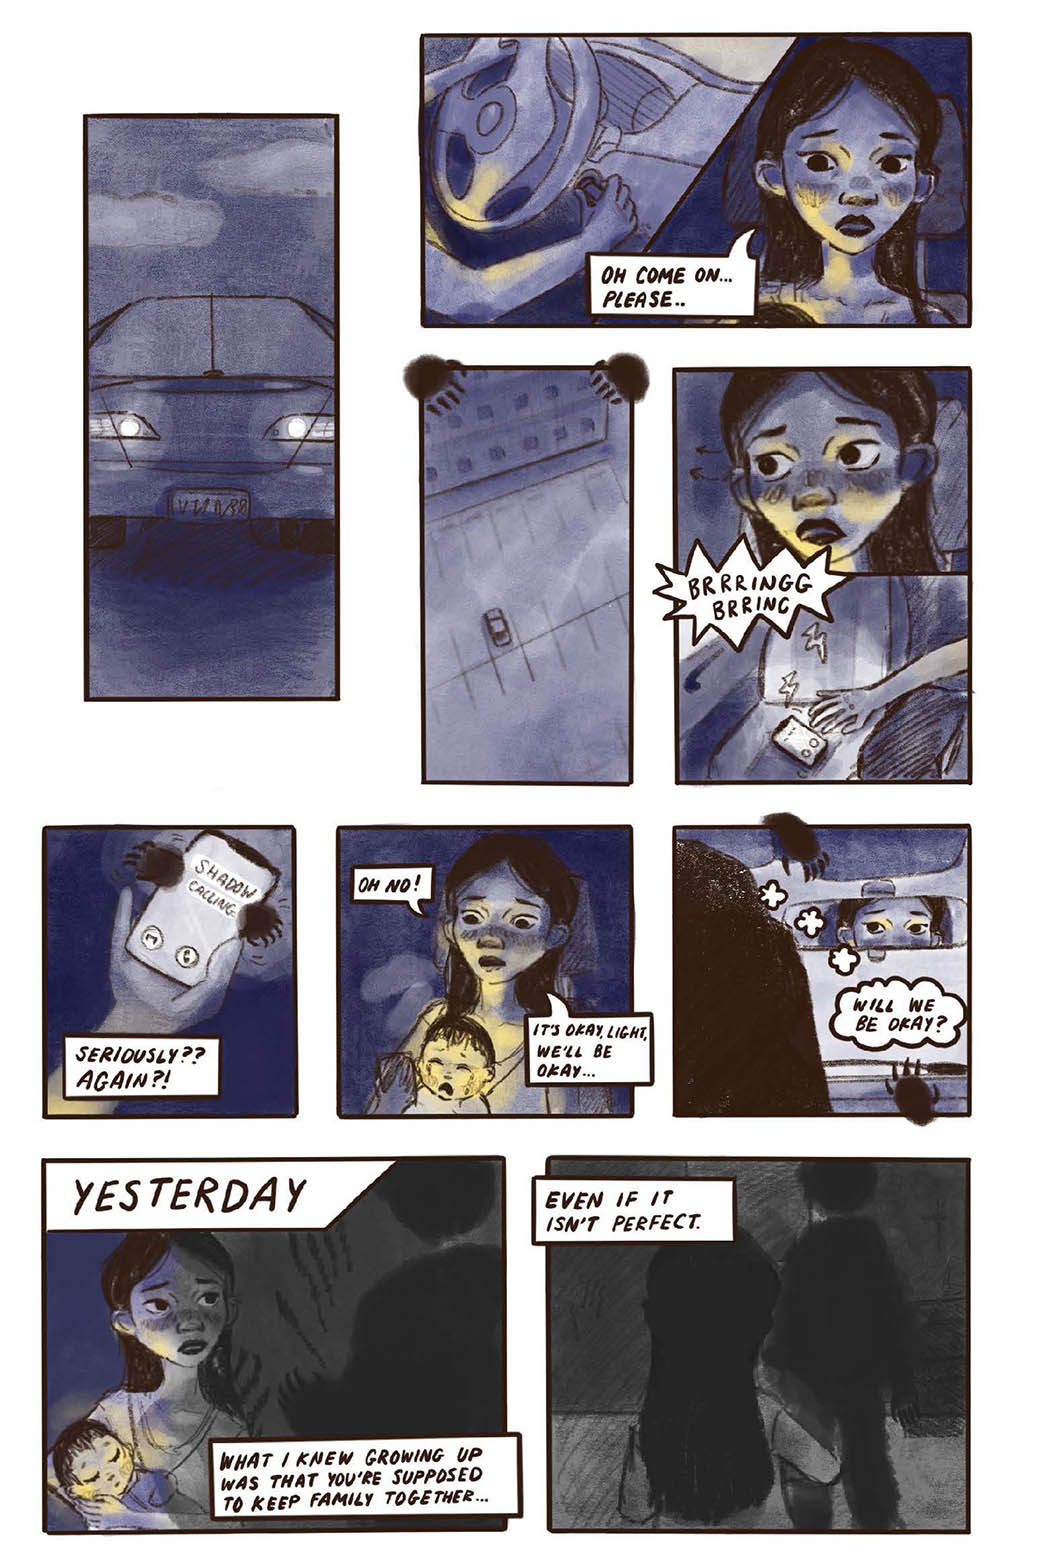 An excerpt from Marin's comic, "Toward Light," for the PSU collaborative comics projects shows the main character in her car and checking her phone. 